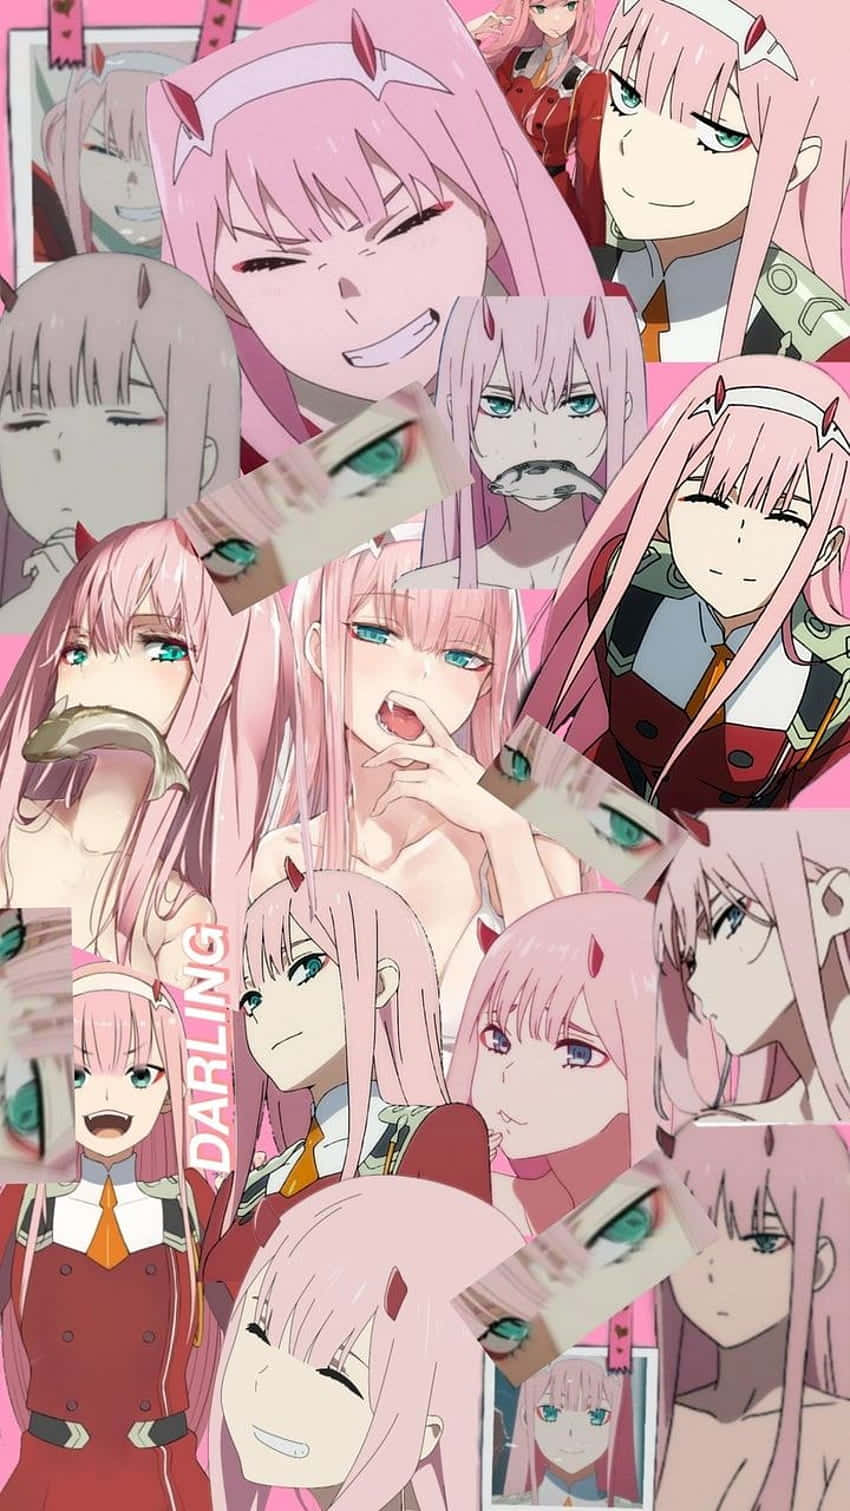 "Meet Zero Two, the star of darling in the franxx"